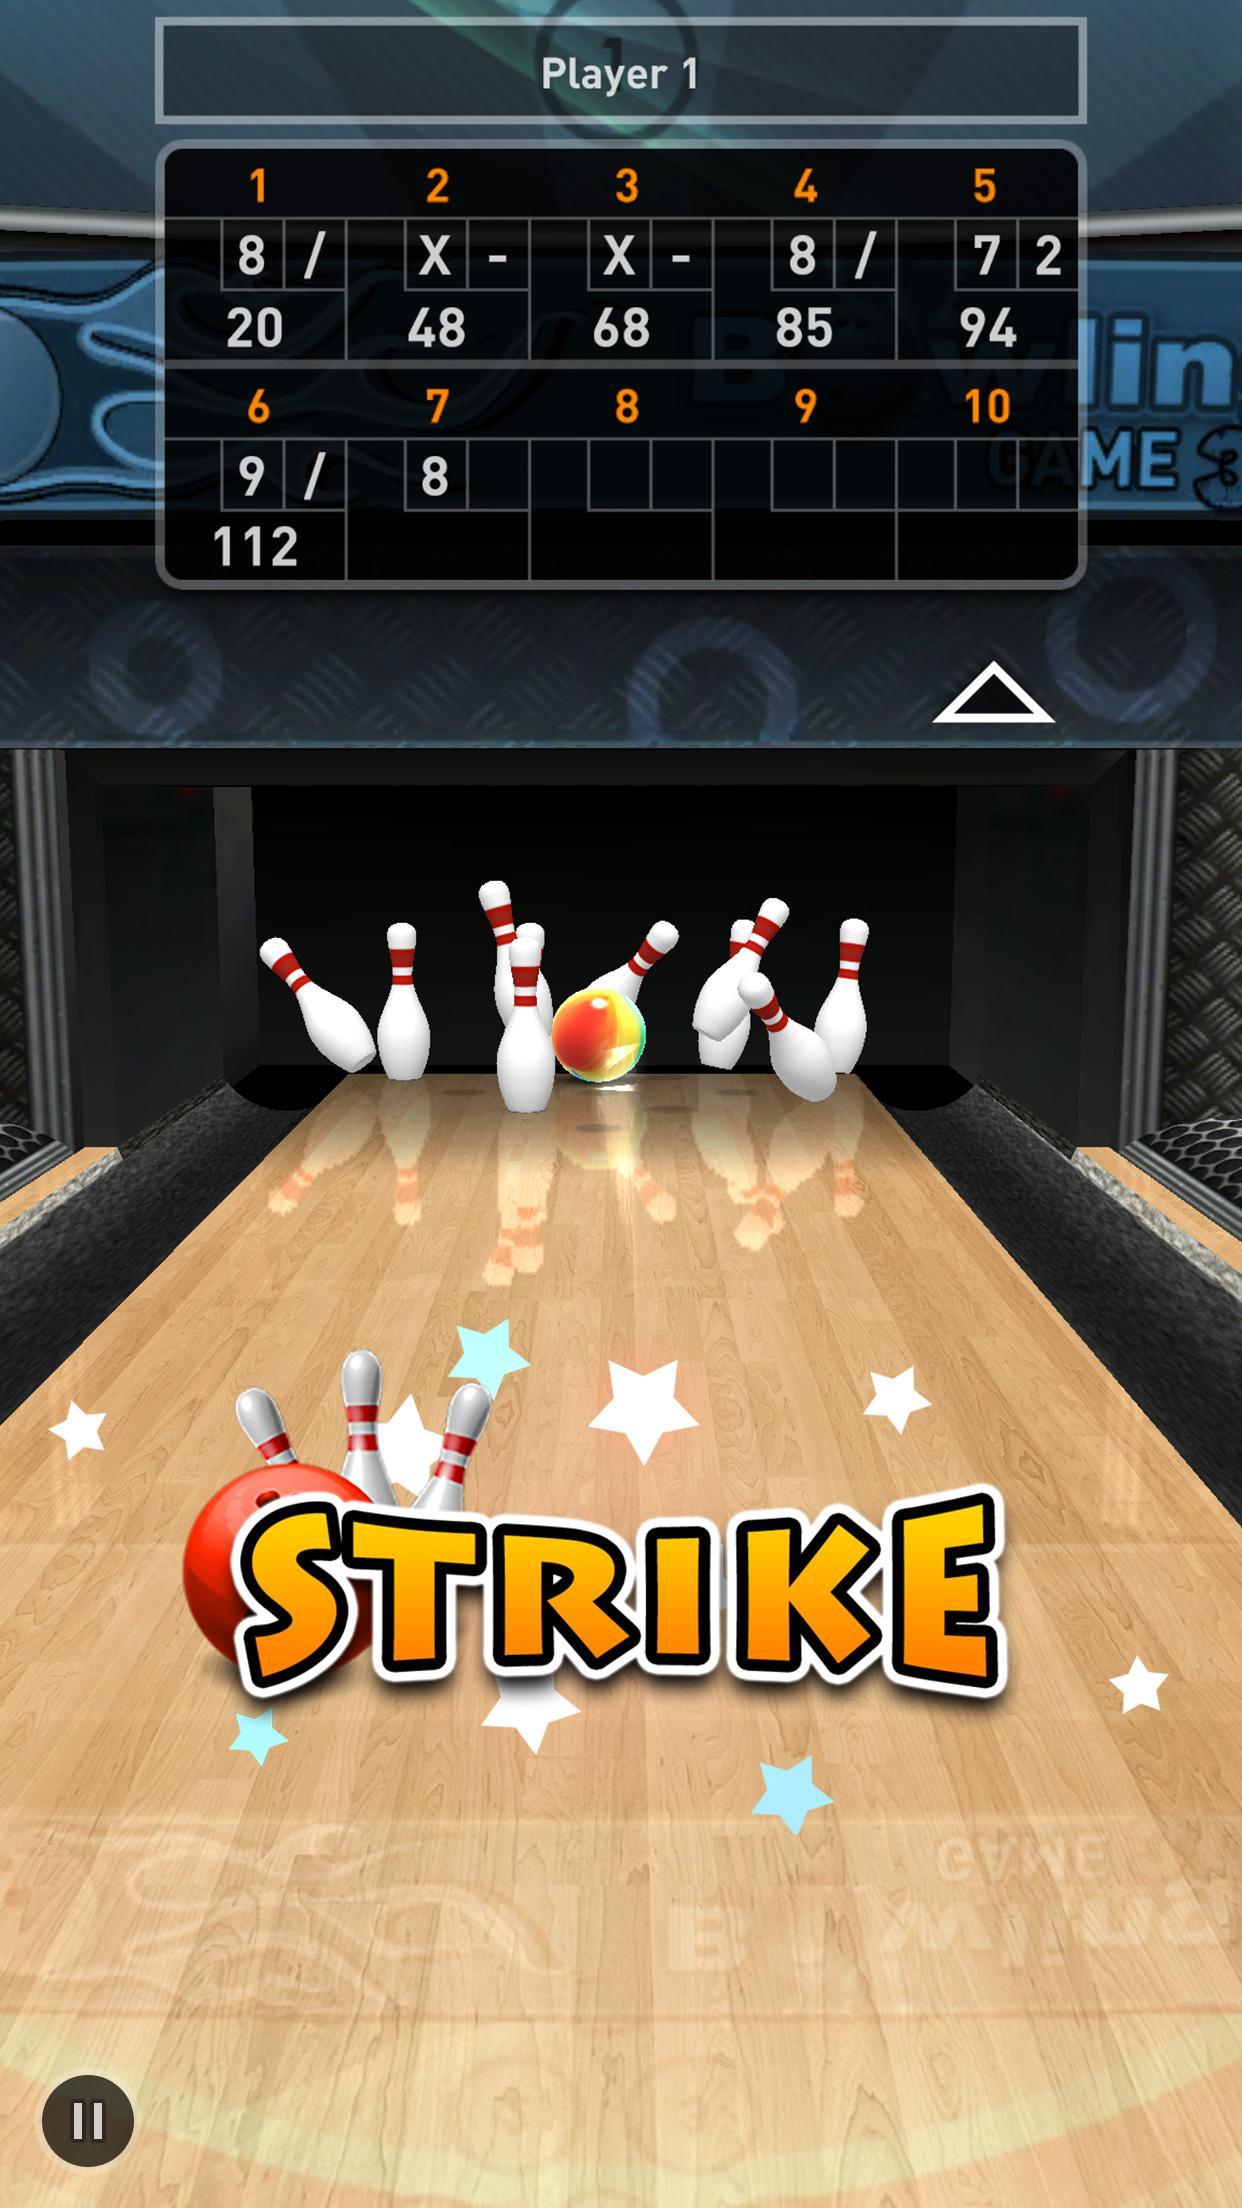 Bowling Game 3D HD FREE For Android - APK Download